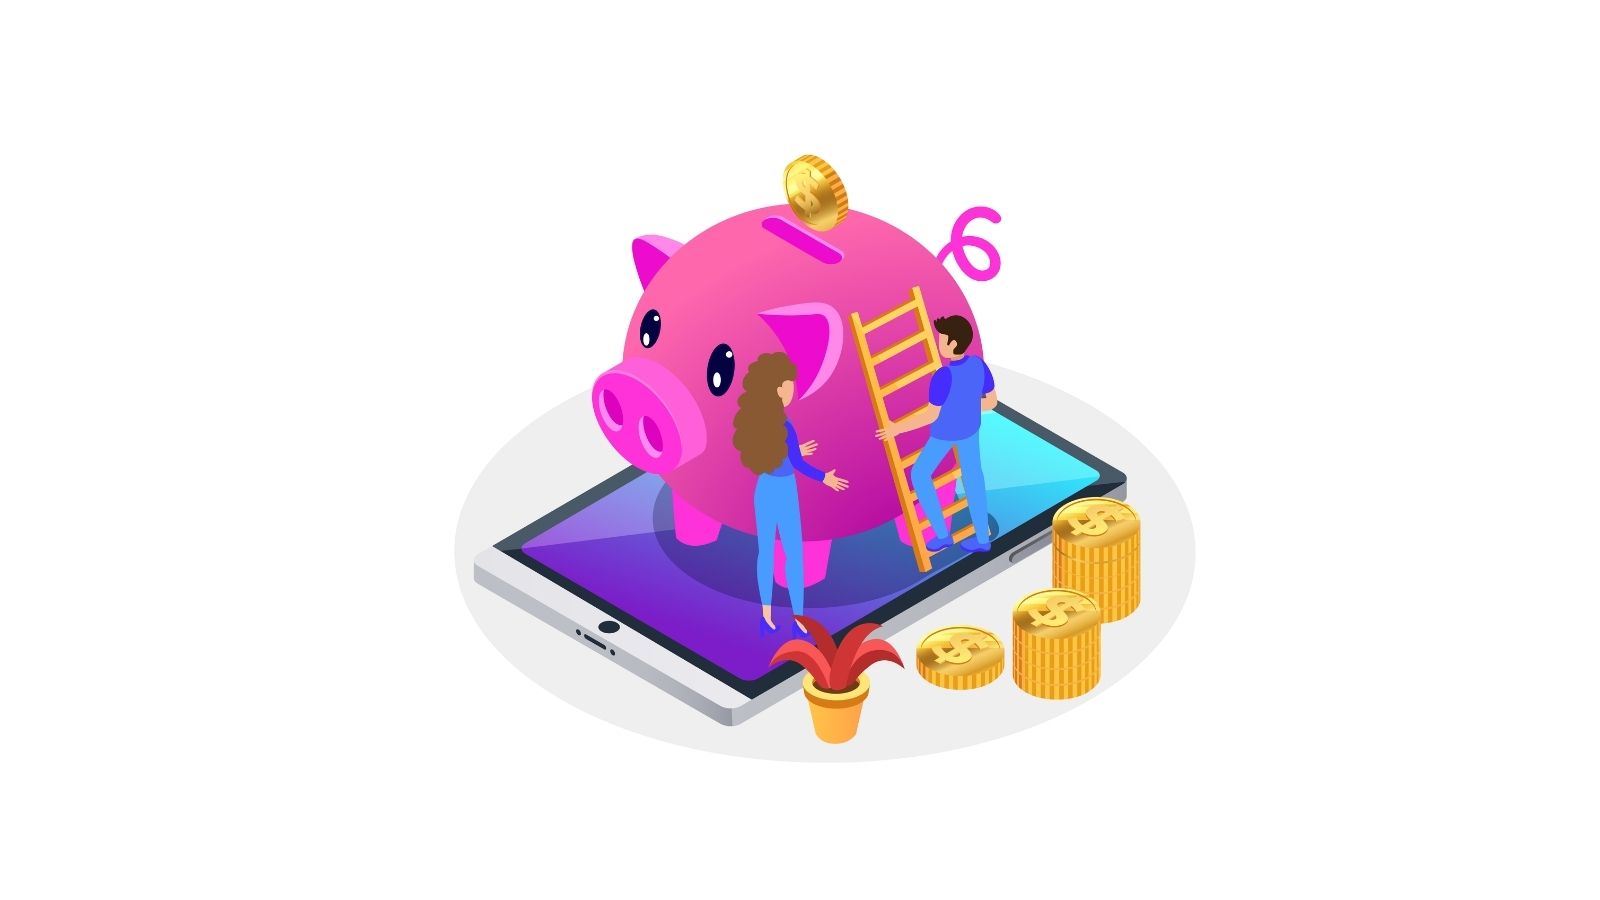 Detailed reviews and information for remote teams Isometric Illustrations